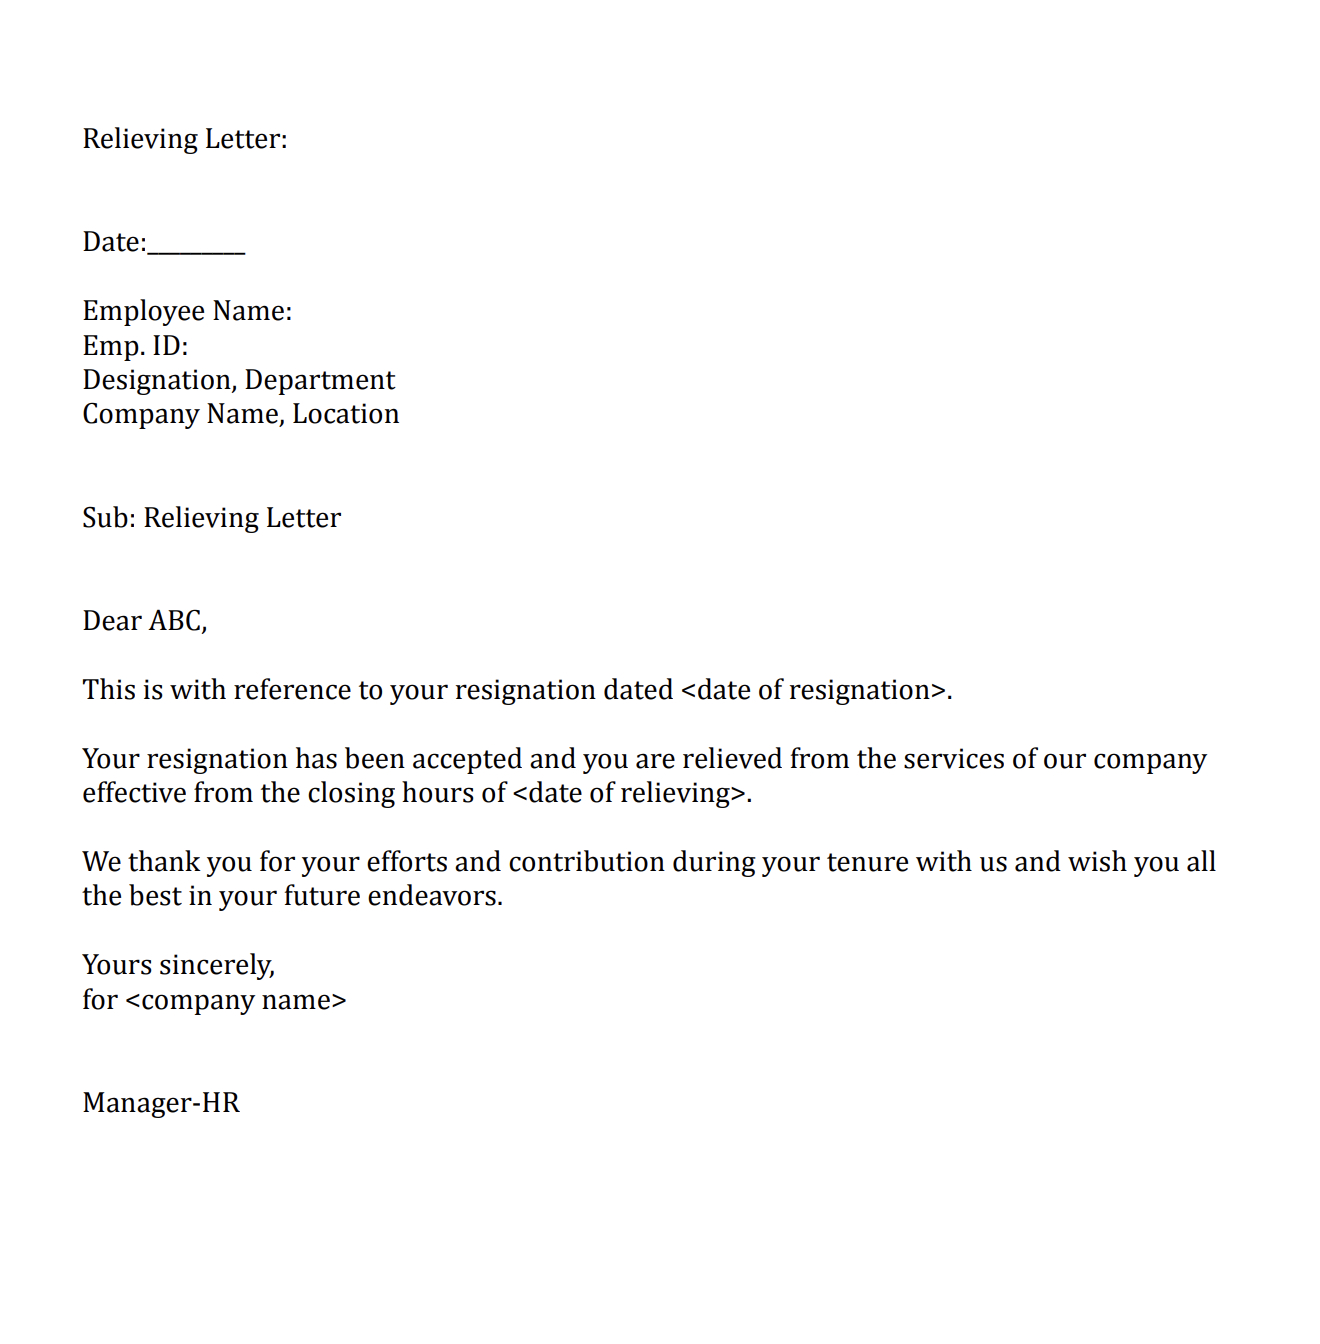 sample relieving letter